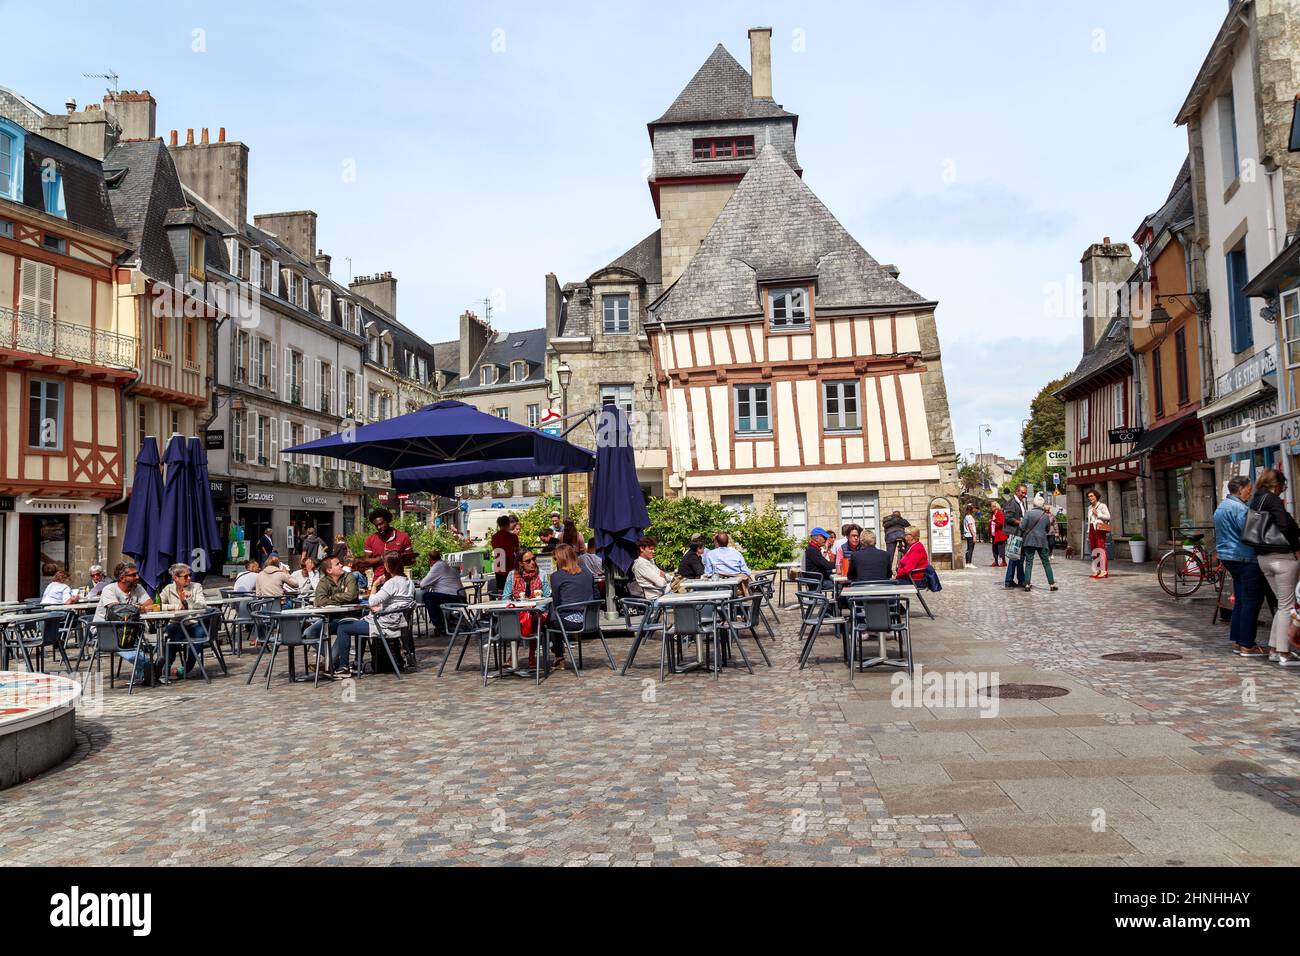 QUIMPER , FRANCE - SEPTEMBER 6, 2019: This is Place Terre au Duc, with half-timbered and stone medieval houses. Stock Photo